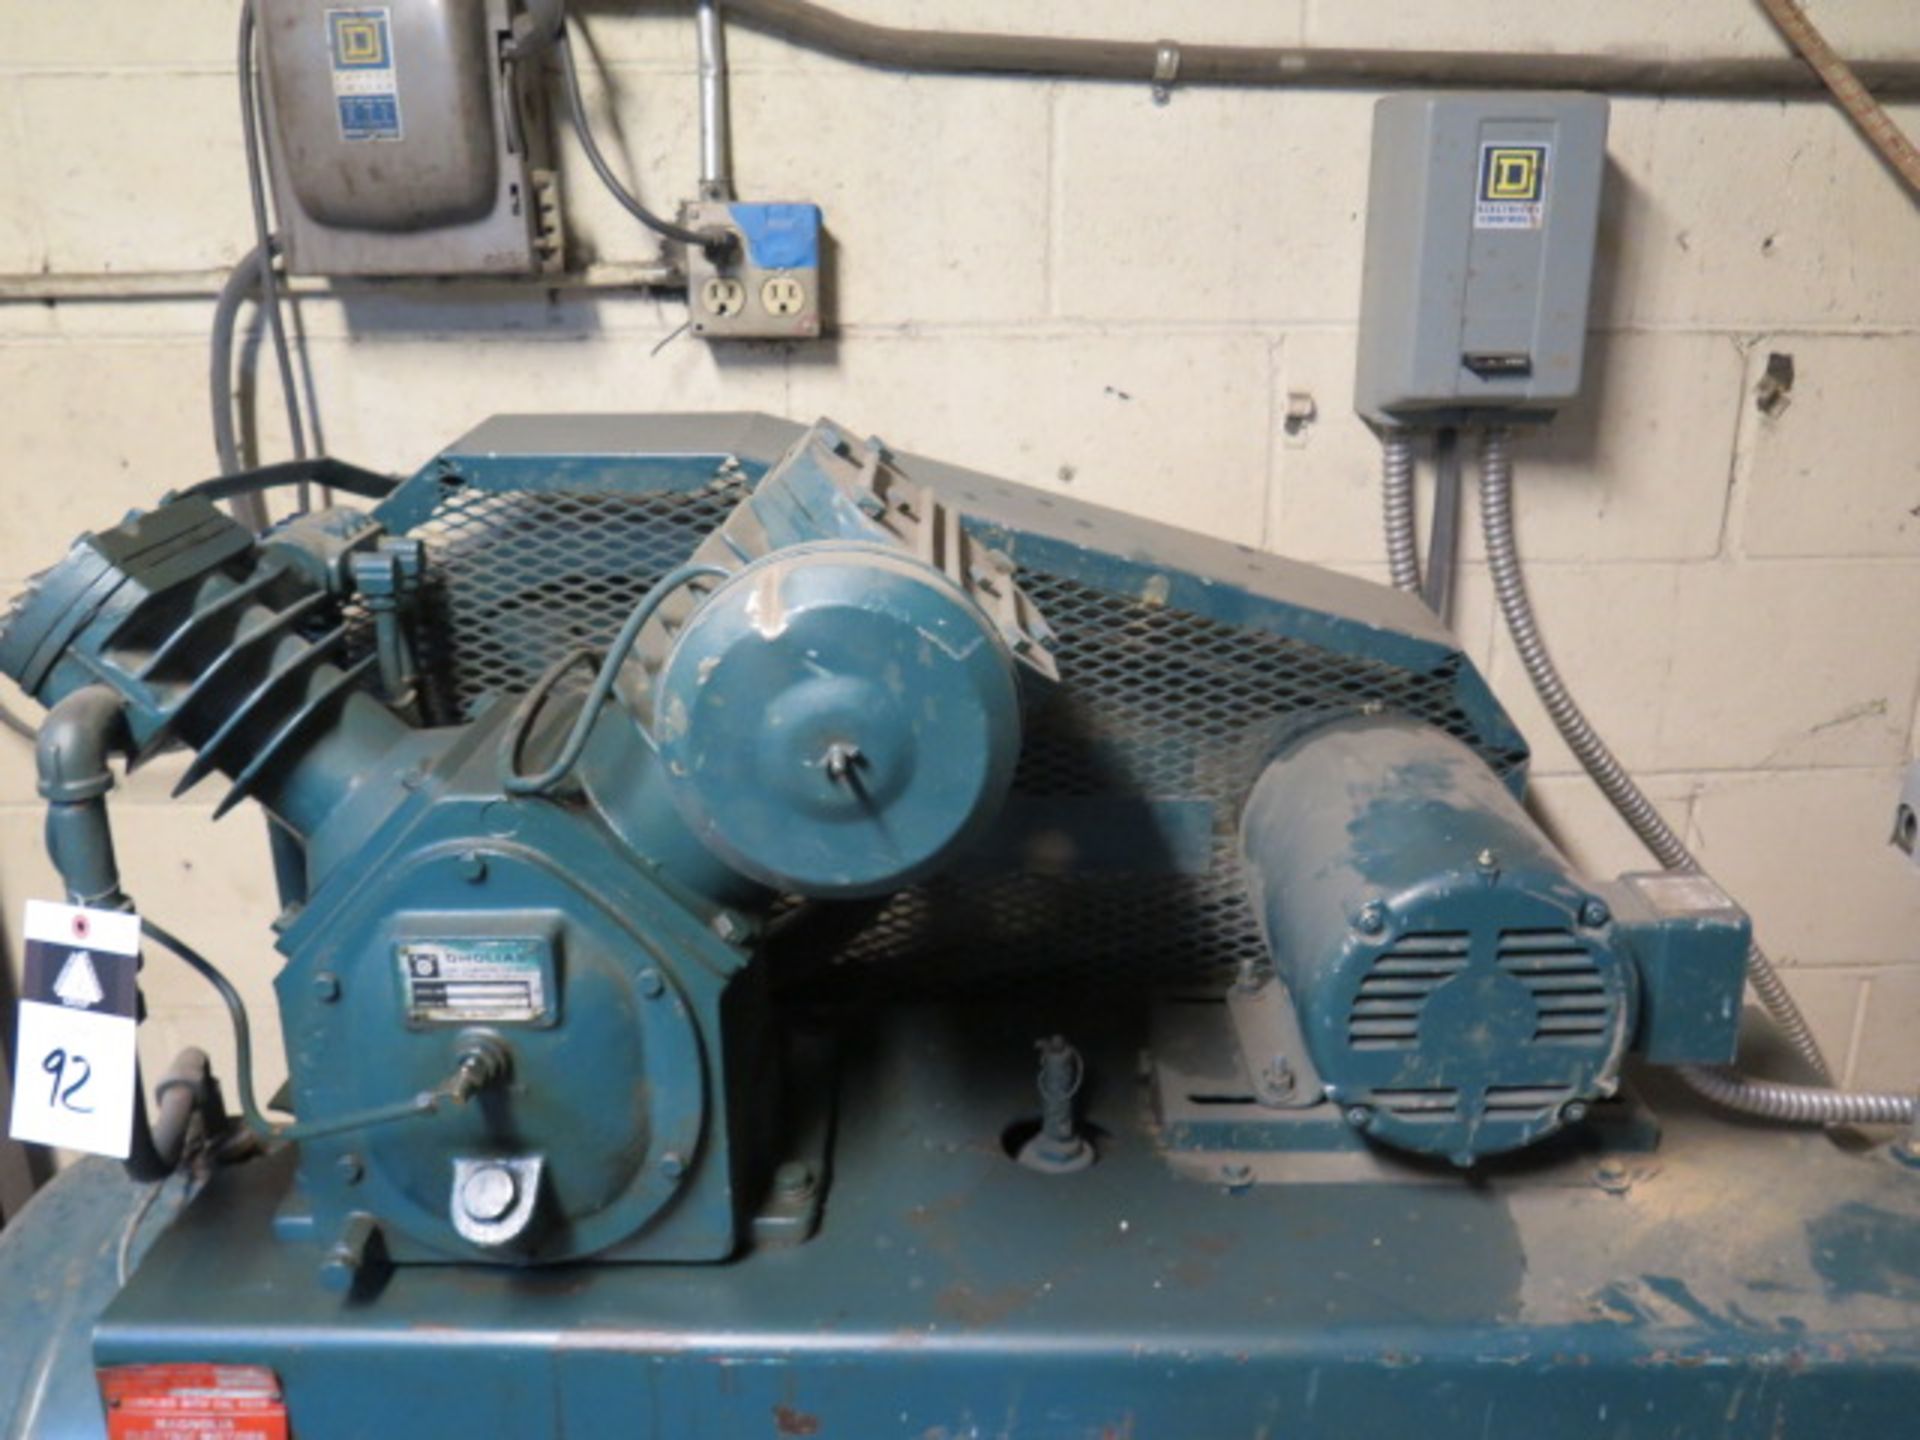 Magnolia 5Hp Horizontal Air Compressor w/ 2-Stage Pump, 80 Gallon Tank (SOLD AS-IS - NO WARRANTY) - Image 3 of 3